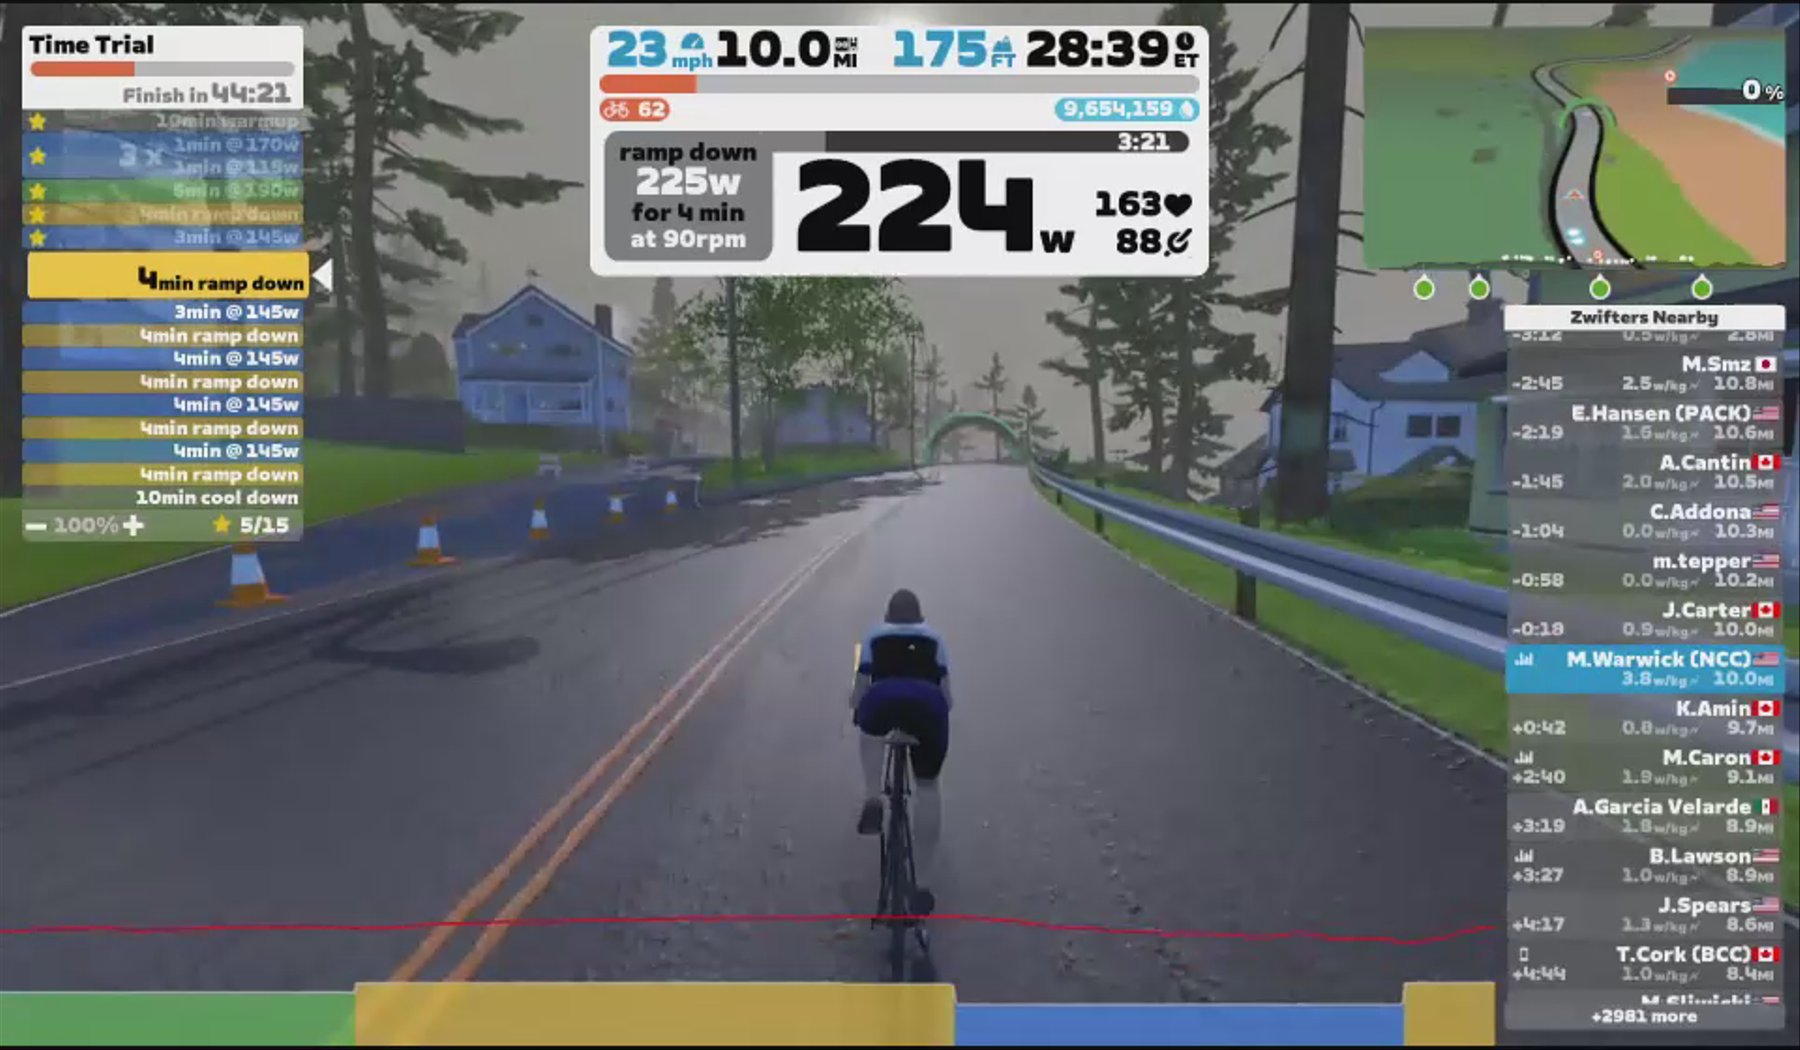 Zwift - Time Trial in Watopia